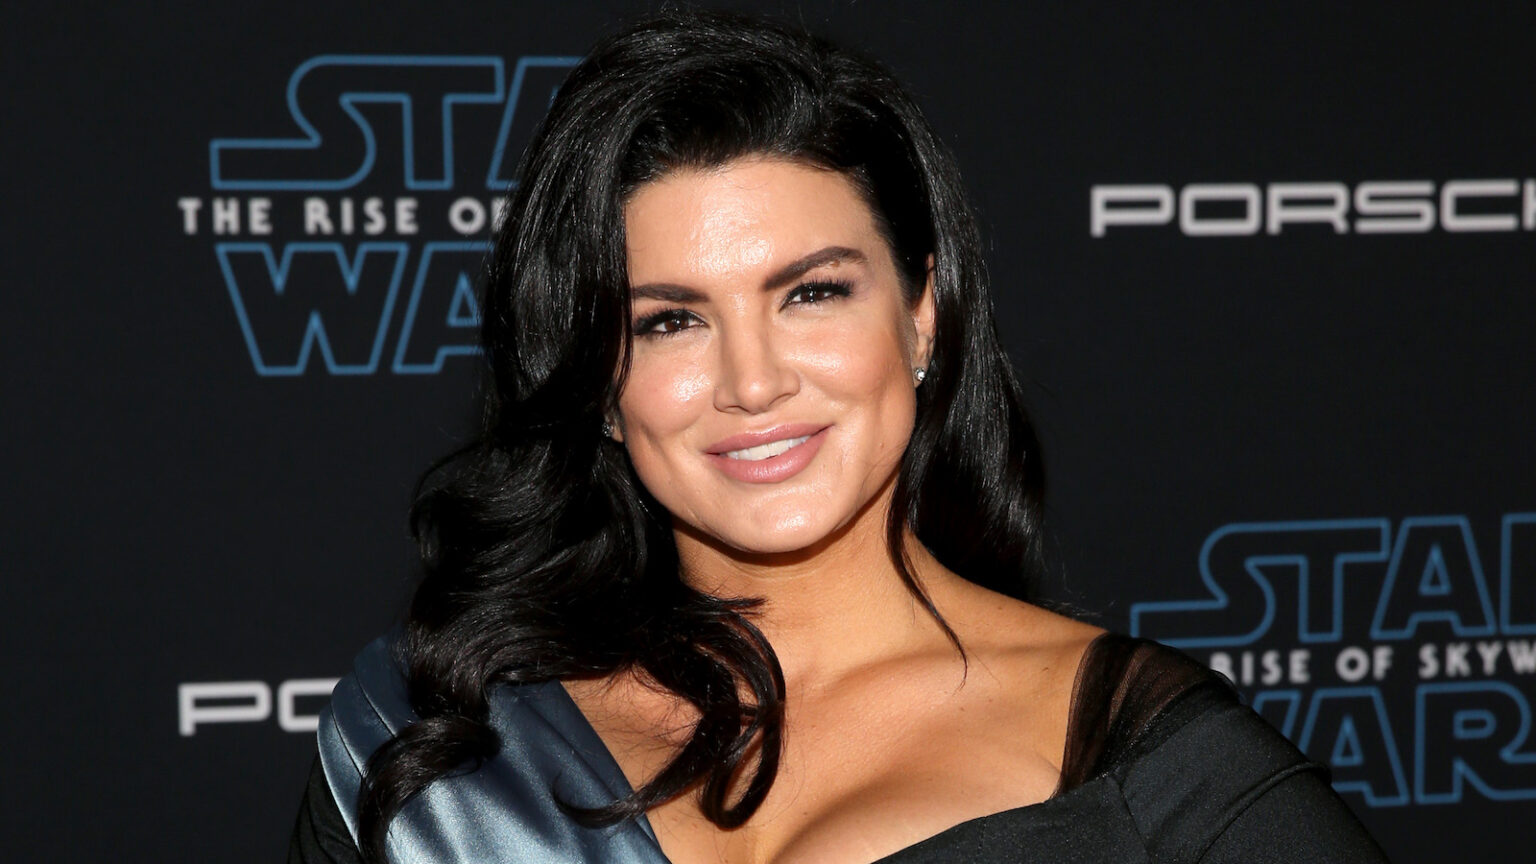 Gina Carano Is Continuing With Her Conspiracy Theory Crusade